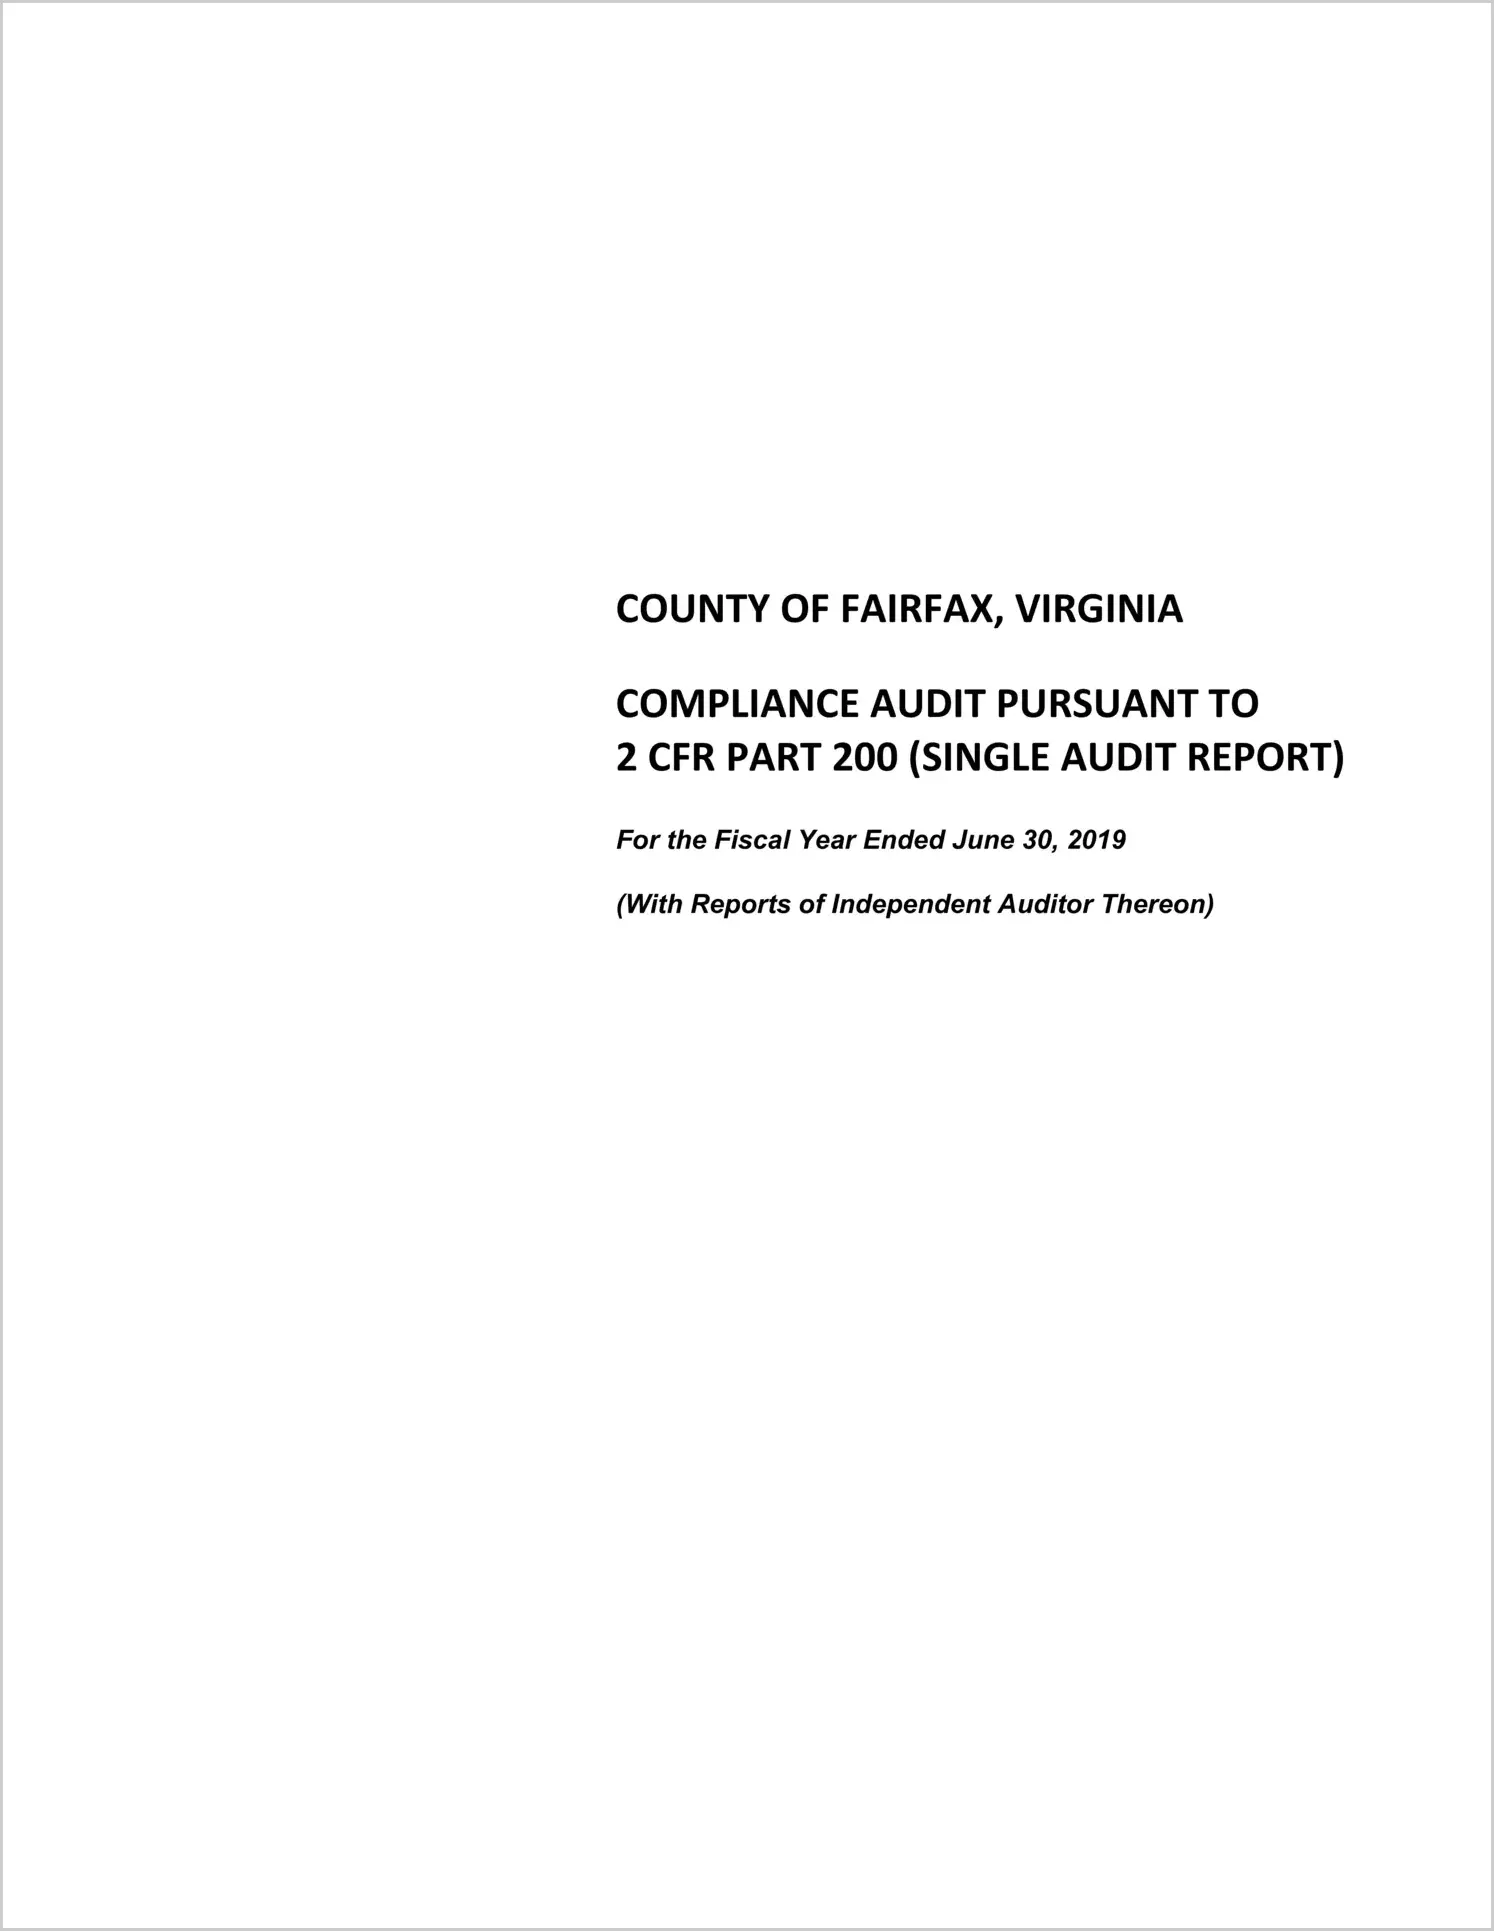 2019 Internal Control and Compliance Report for County of Fairfax